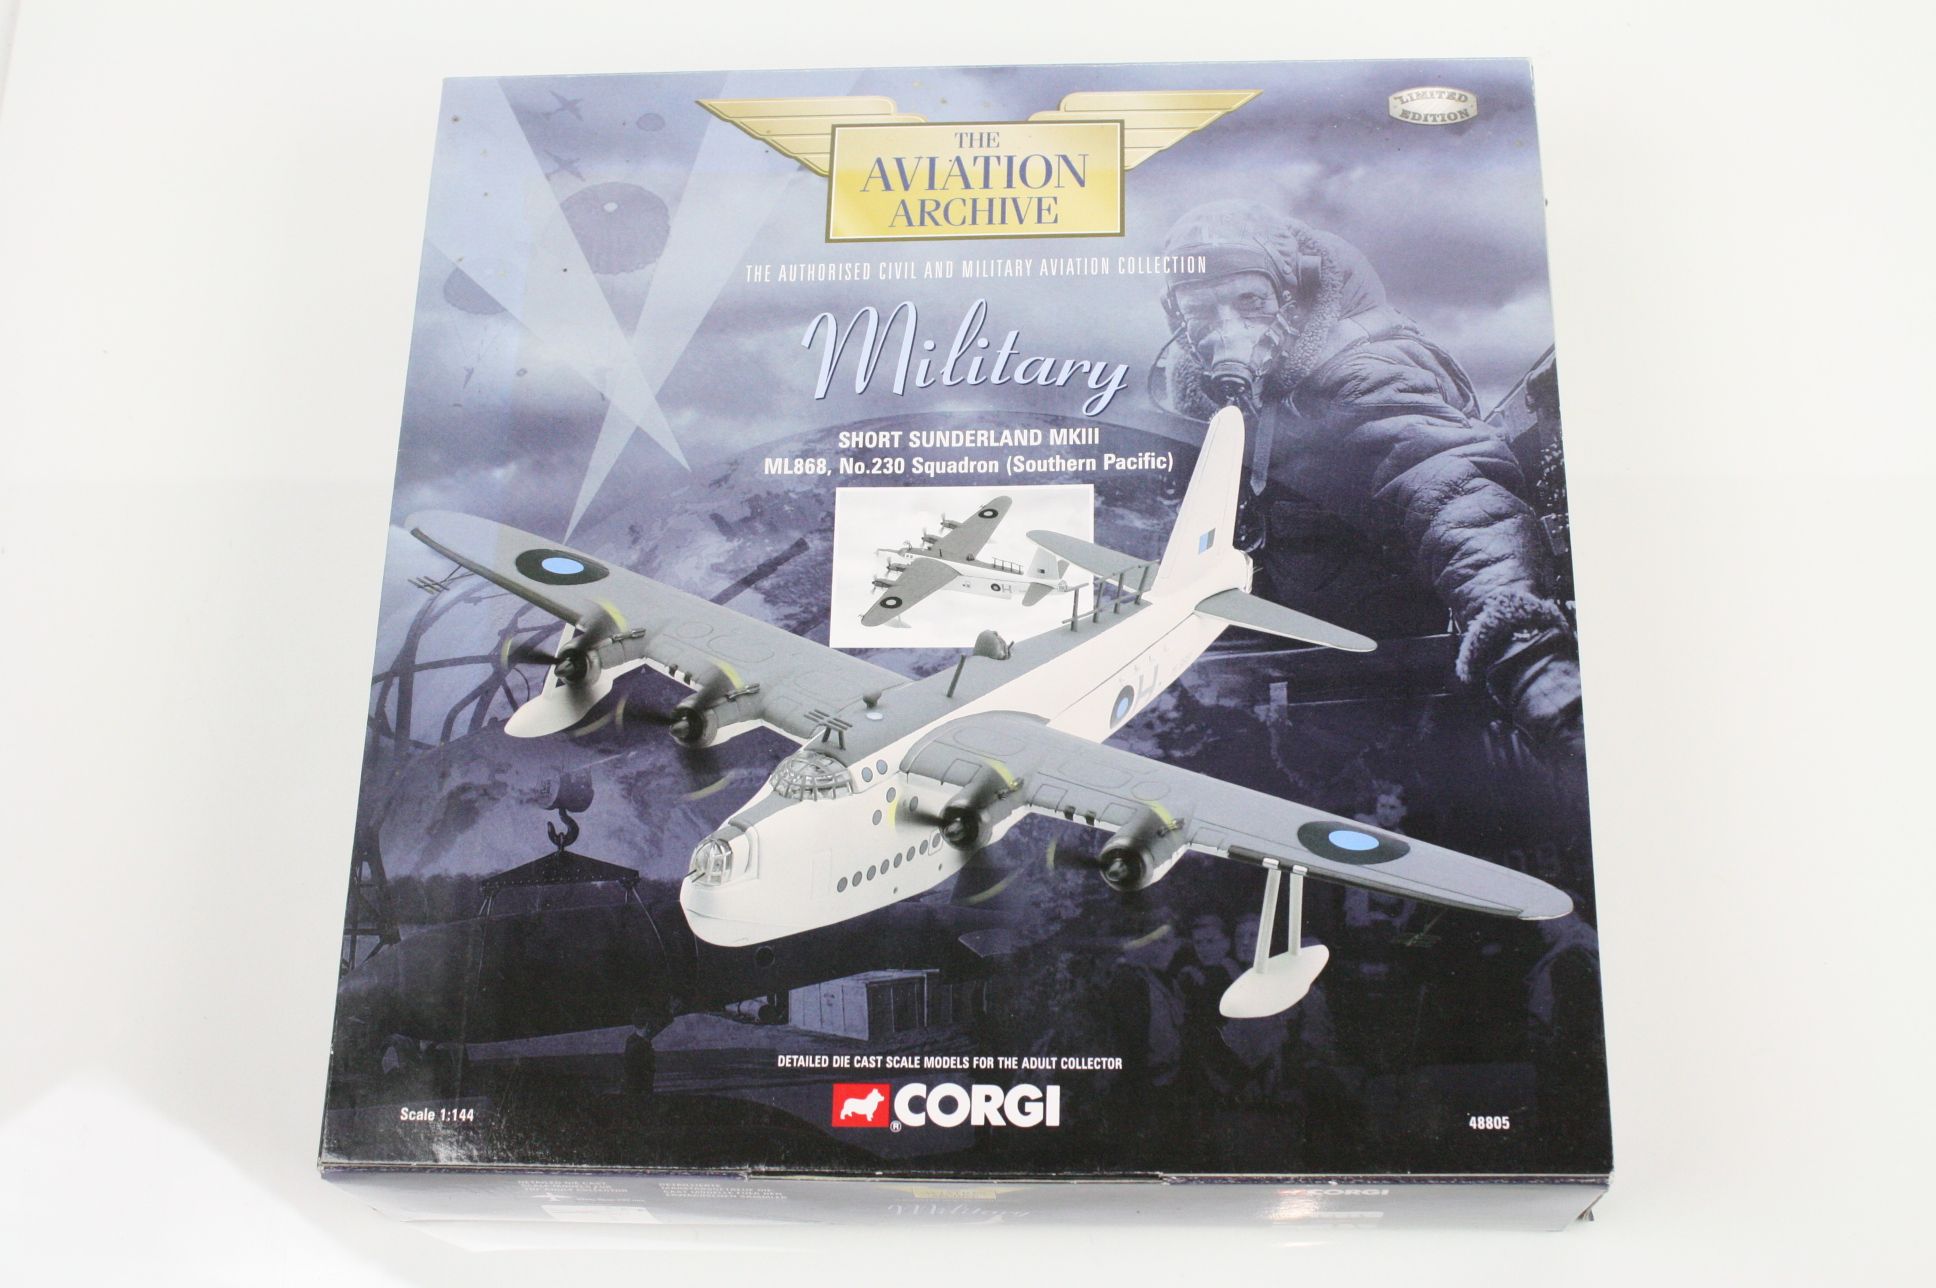 Five boxed ltd edn Corgi The Aviation Archive model planes to include Military x 3 (48805 Short - Image 3 of 12